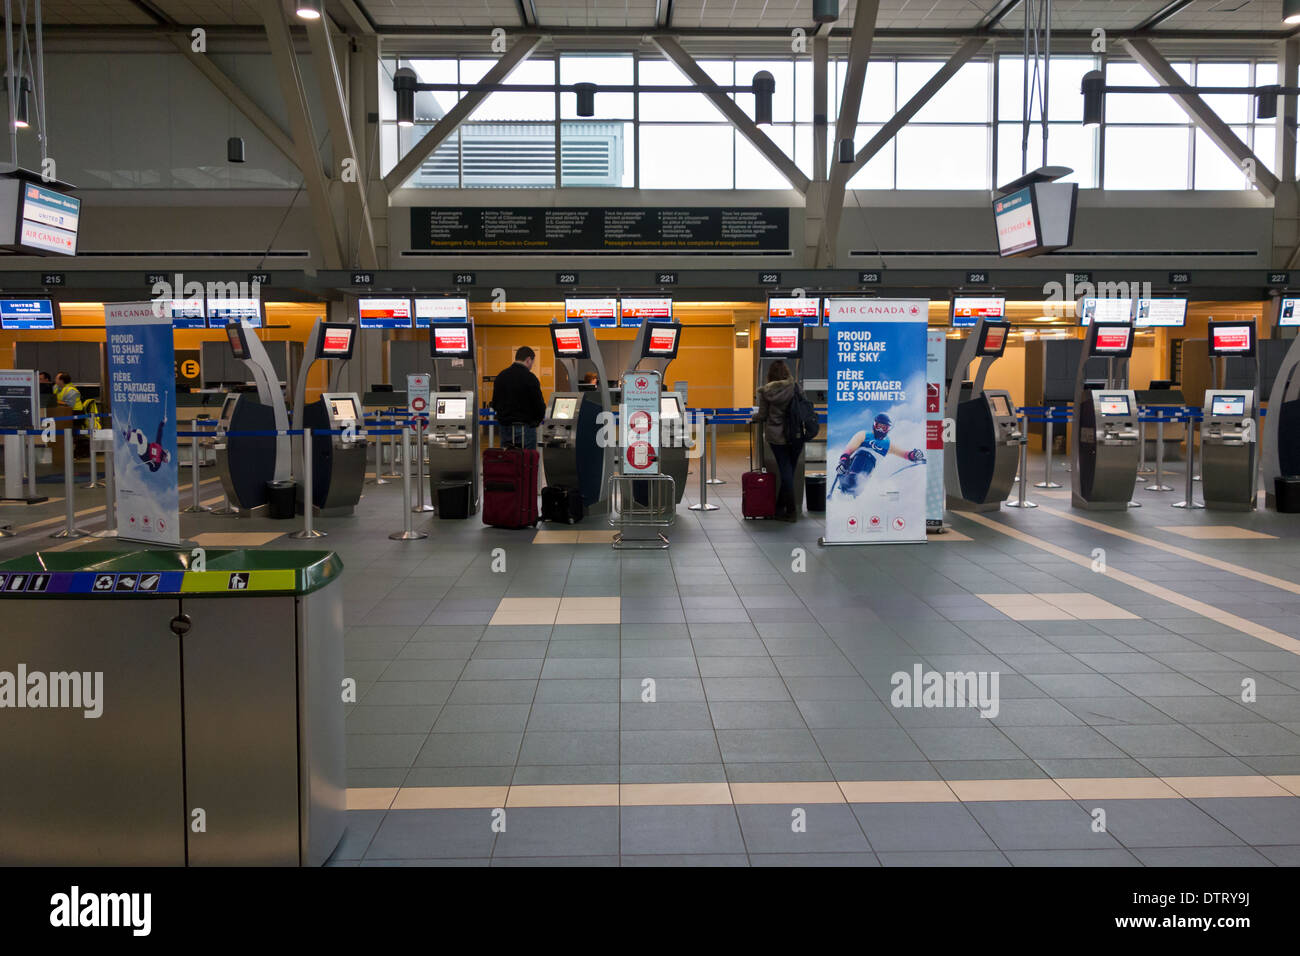 Passengers with luggage using the Air Canada check in kiosks terminals in the International side of the Vancouver International Airport YVR. Stock Photo